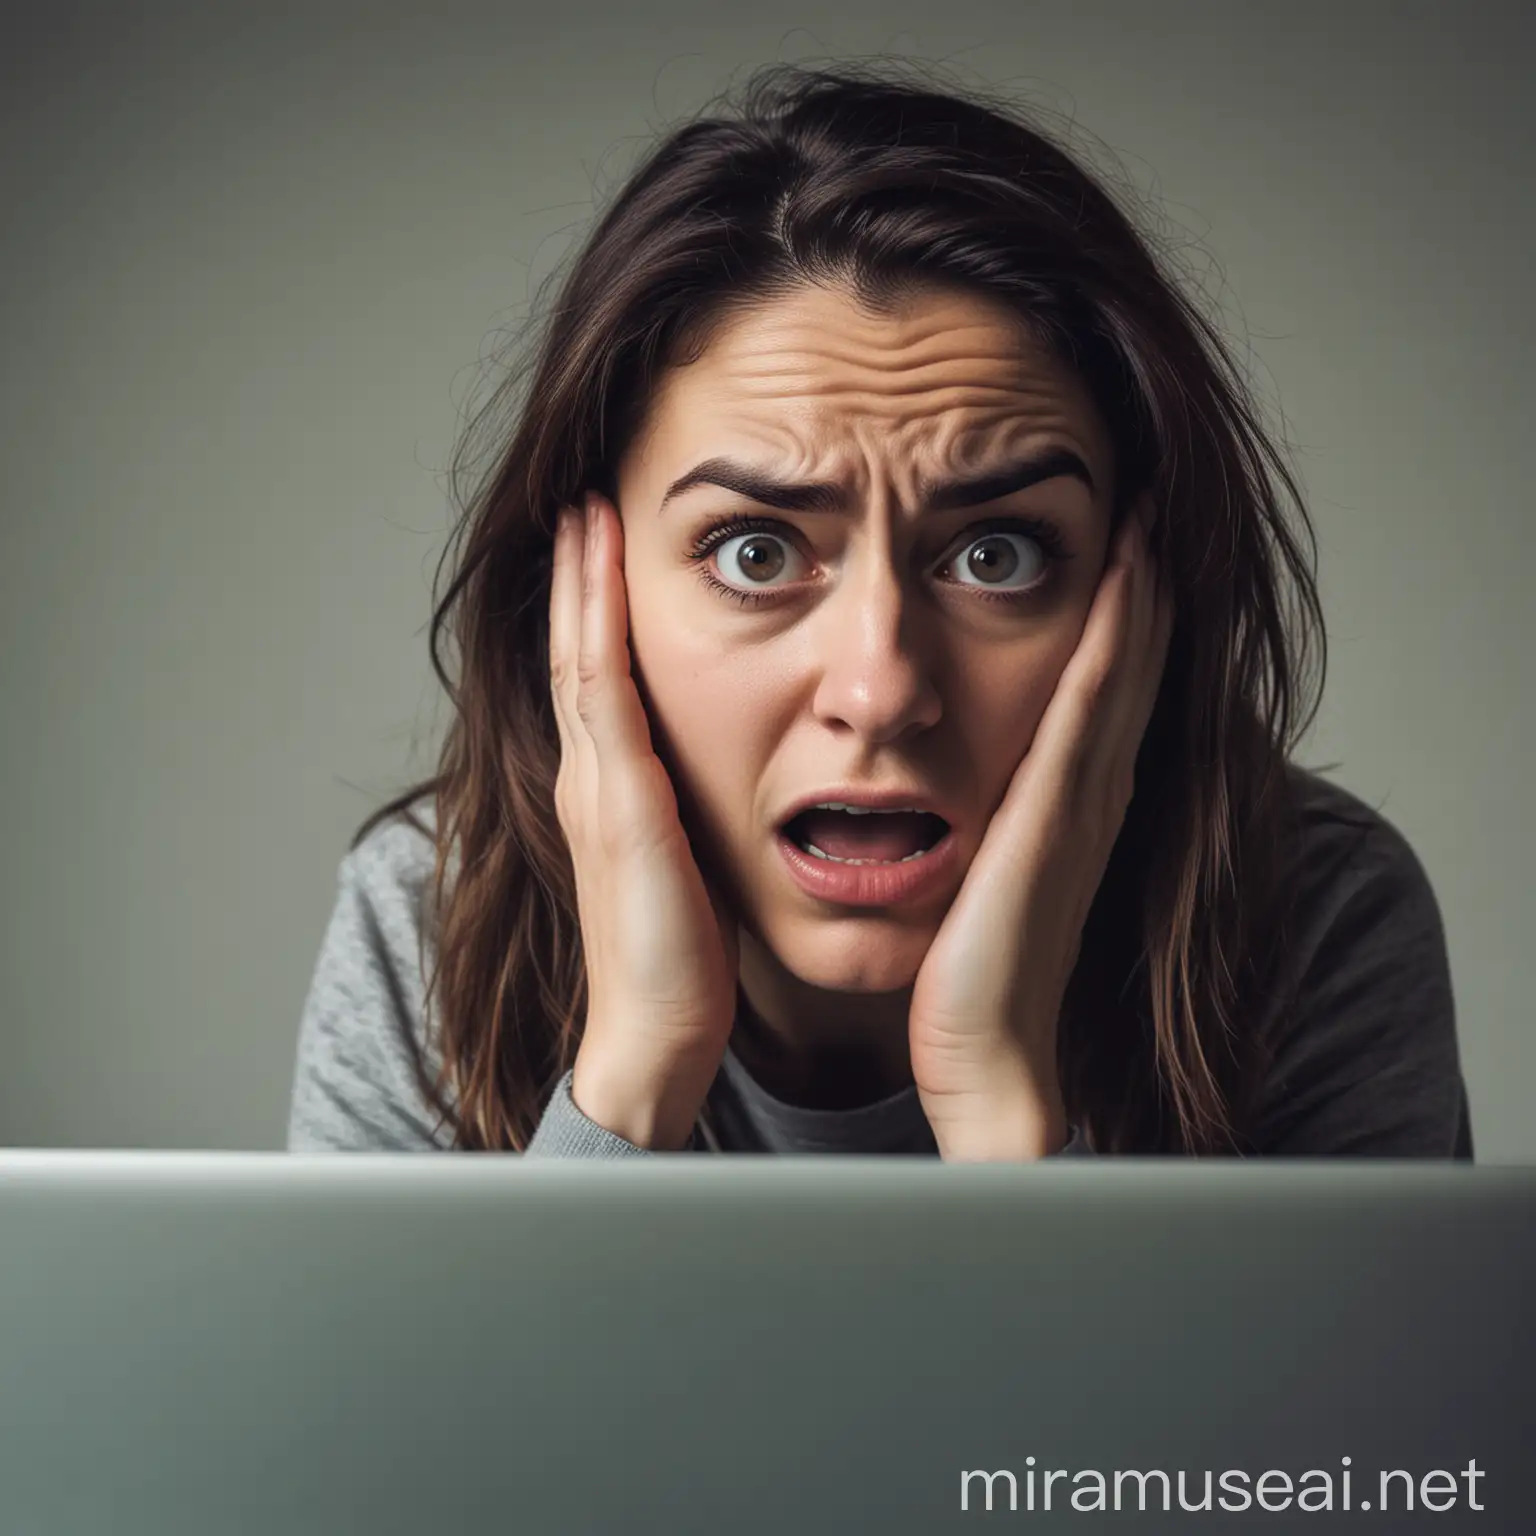 A person looking at a laptop 
with a scared face
